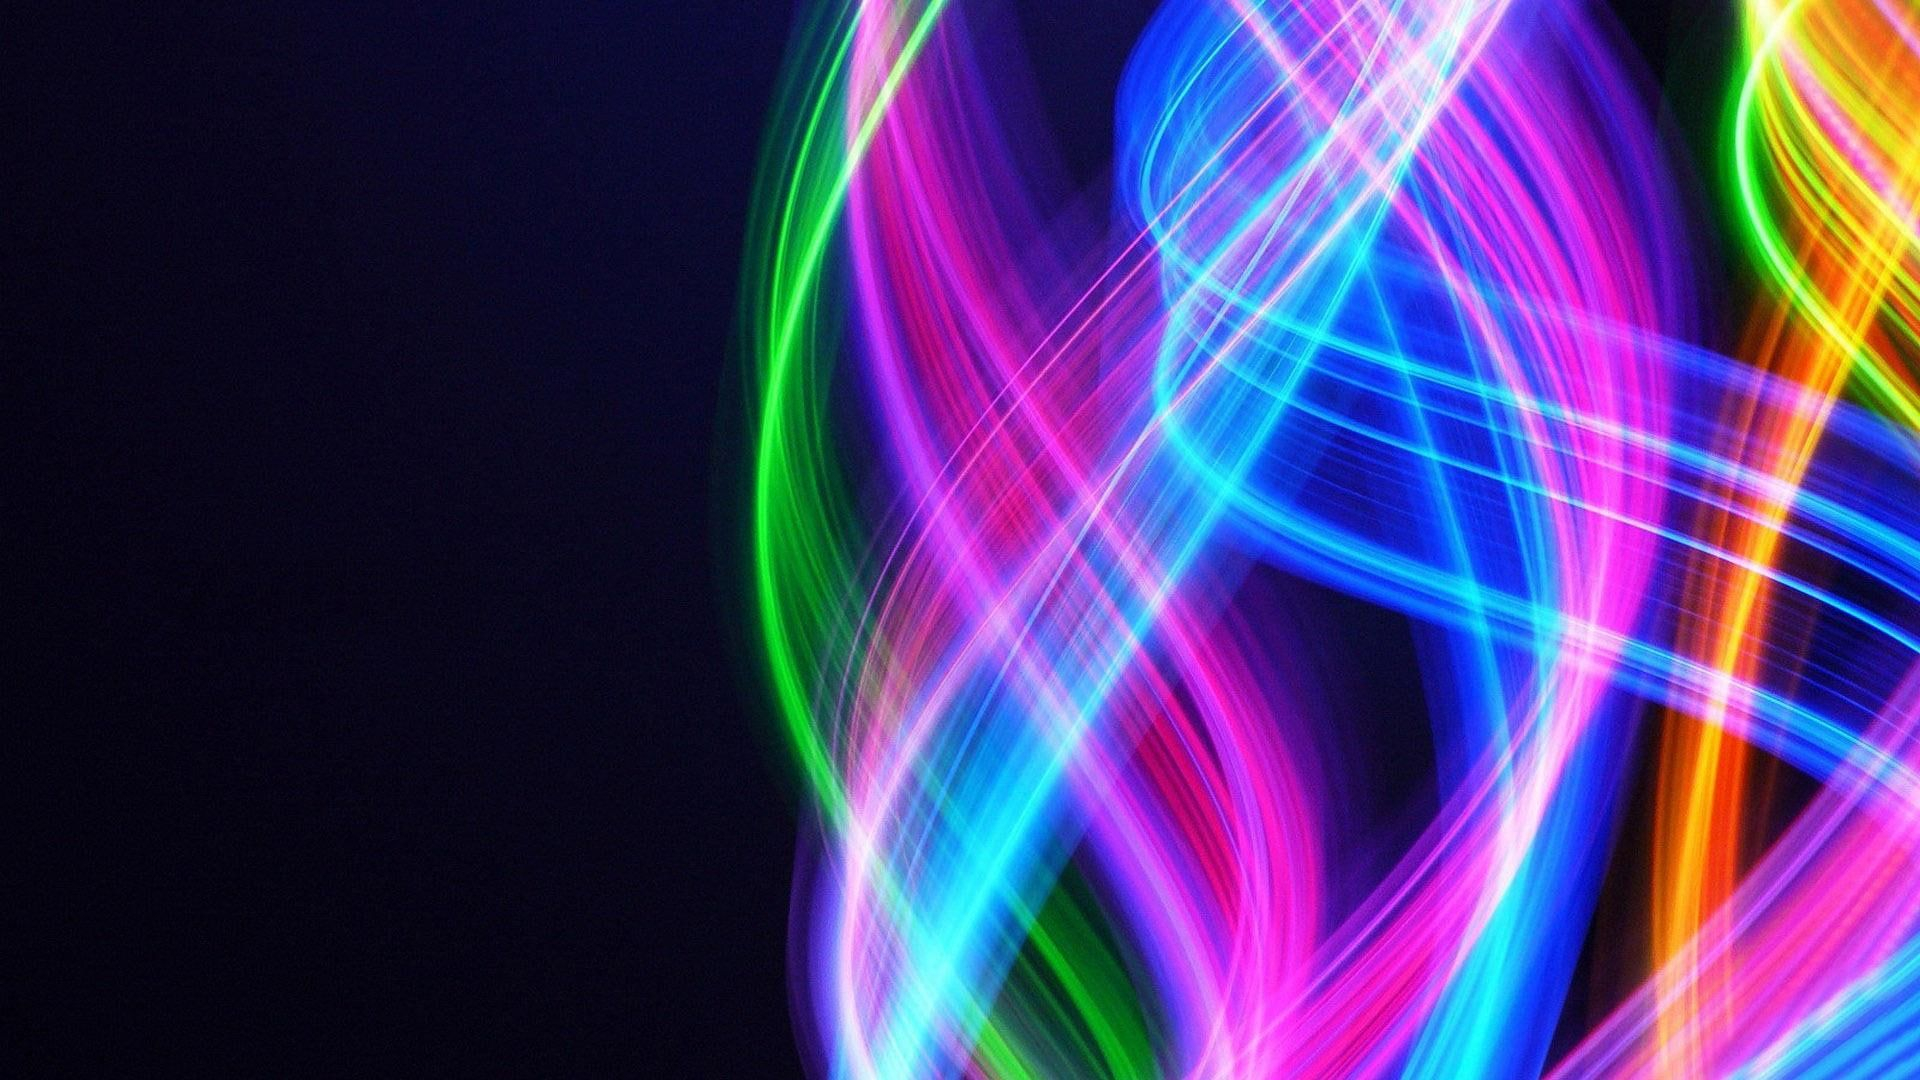 1920x1080 Neon waves, pink green and blue spiral colors #abstract # #wave # neon #1080P #wallpaper #h&acirc;&#128;&brvbar; | Neon wallpaper, Cool backgrounds wallpapers, Neon backgrounds